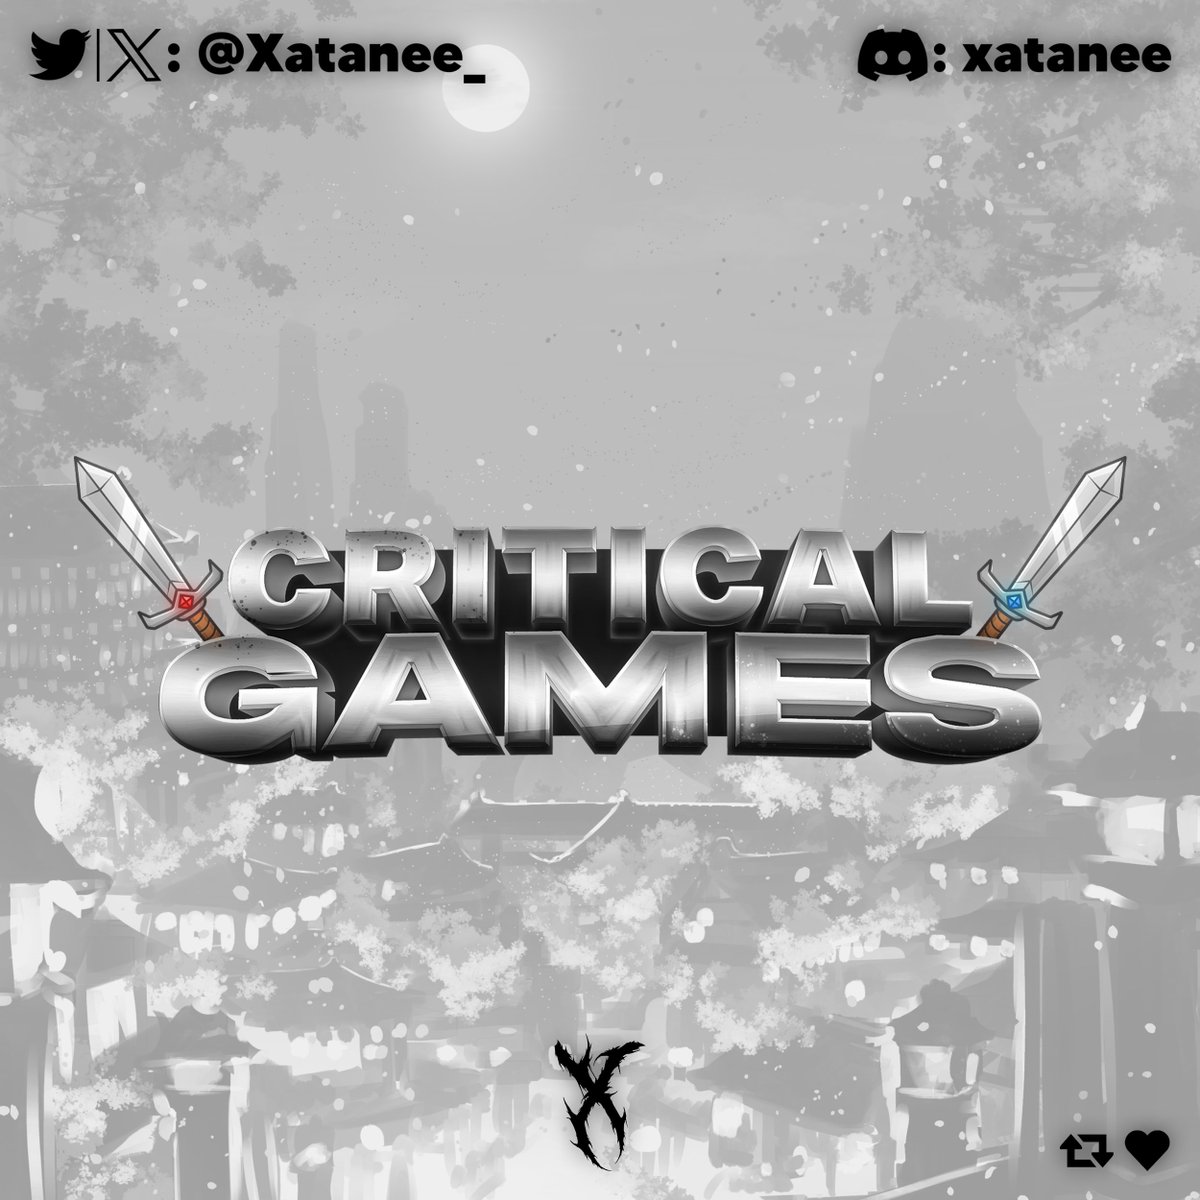 ✨Commission for Critical Games⚔️

📩DM me for order on:
Discord - xatanee
Twitter/X - @Xatanee_

❤️+🔁appreciated!

#ROBLOX #Robux #RobloxStudio #RobloxDev #RobloxArt #RobloxLogo #RobloxLogos #RobloxGFX #RobloxCommission #Commission #Graphic #GraphicDesigner #ForHire #Logos #Log